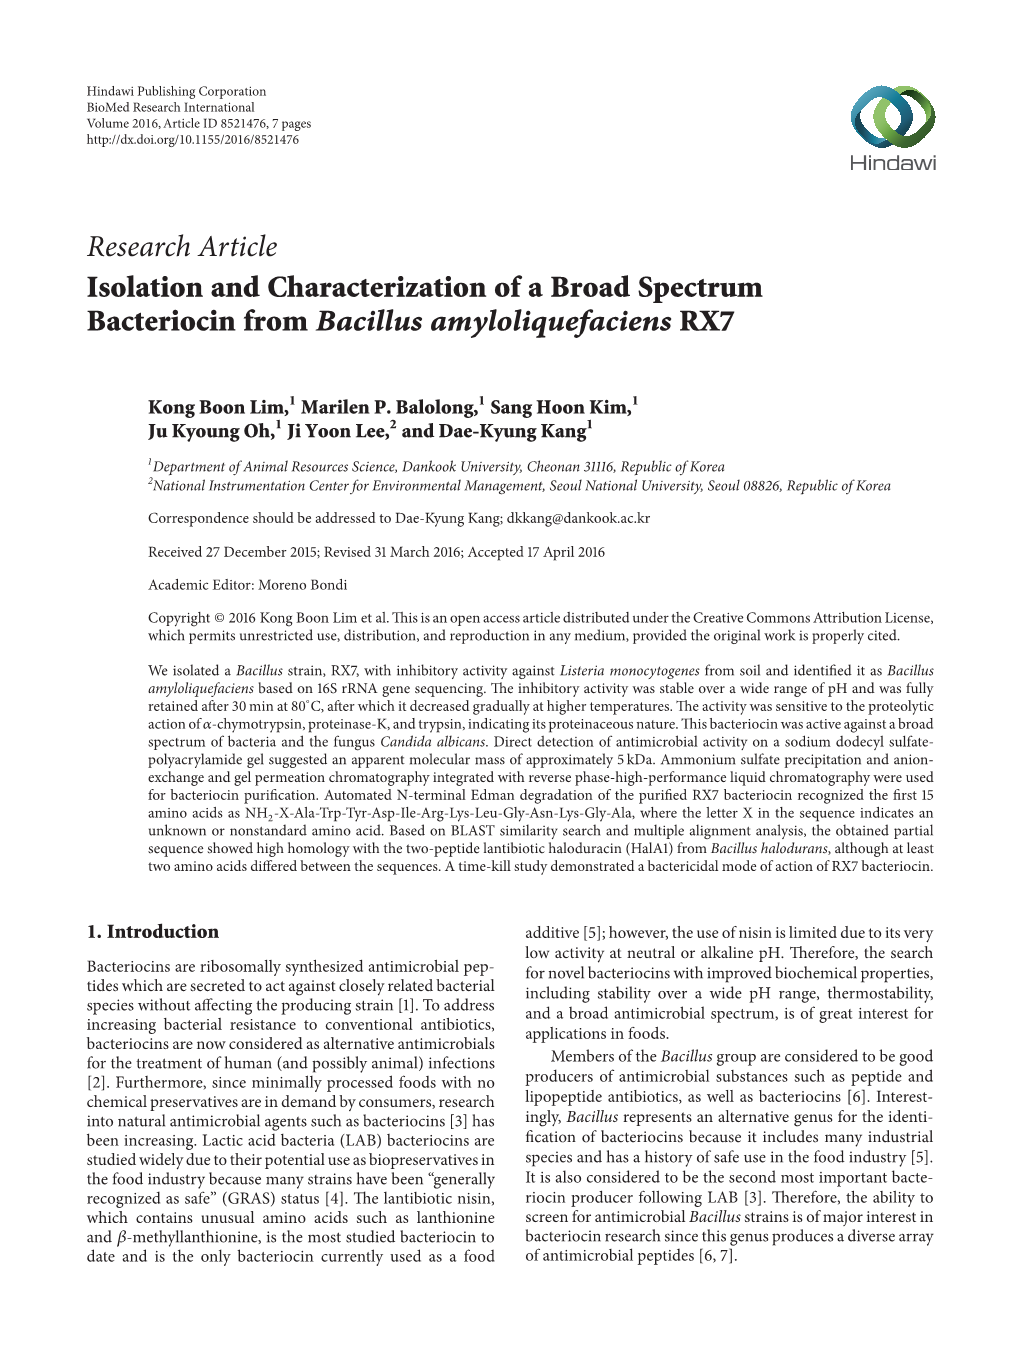 Isolation and Characterization of a Broad Spectrum Bacteriocin from Bacillus Amyloliquefaciens RX7